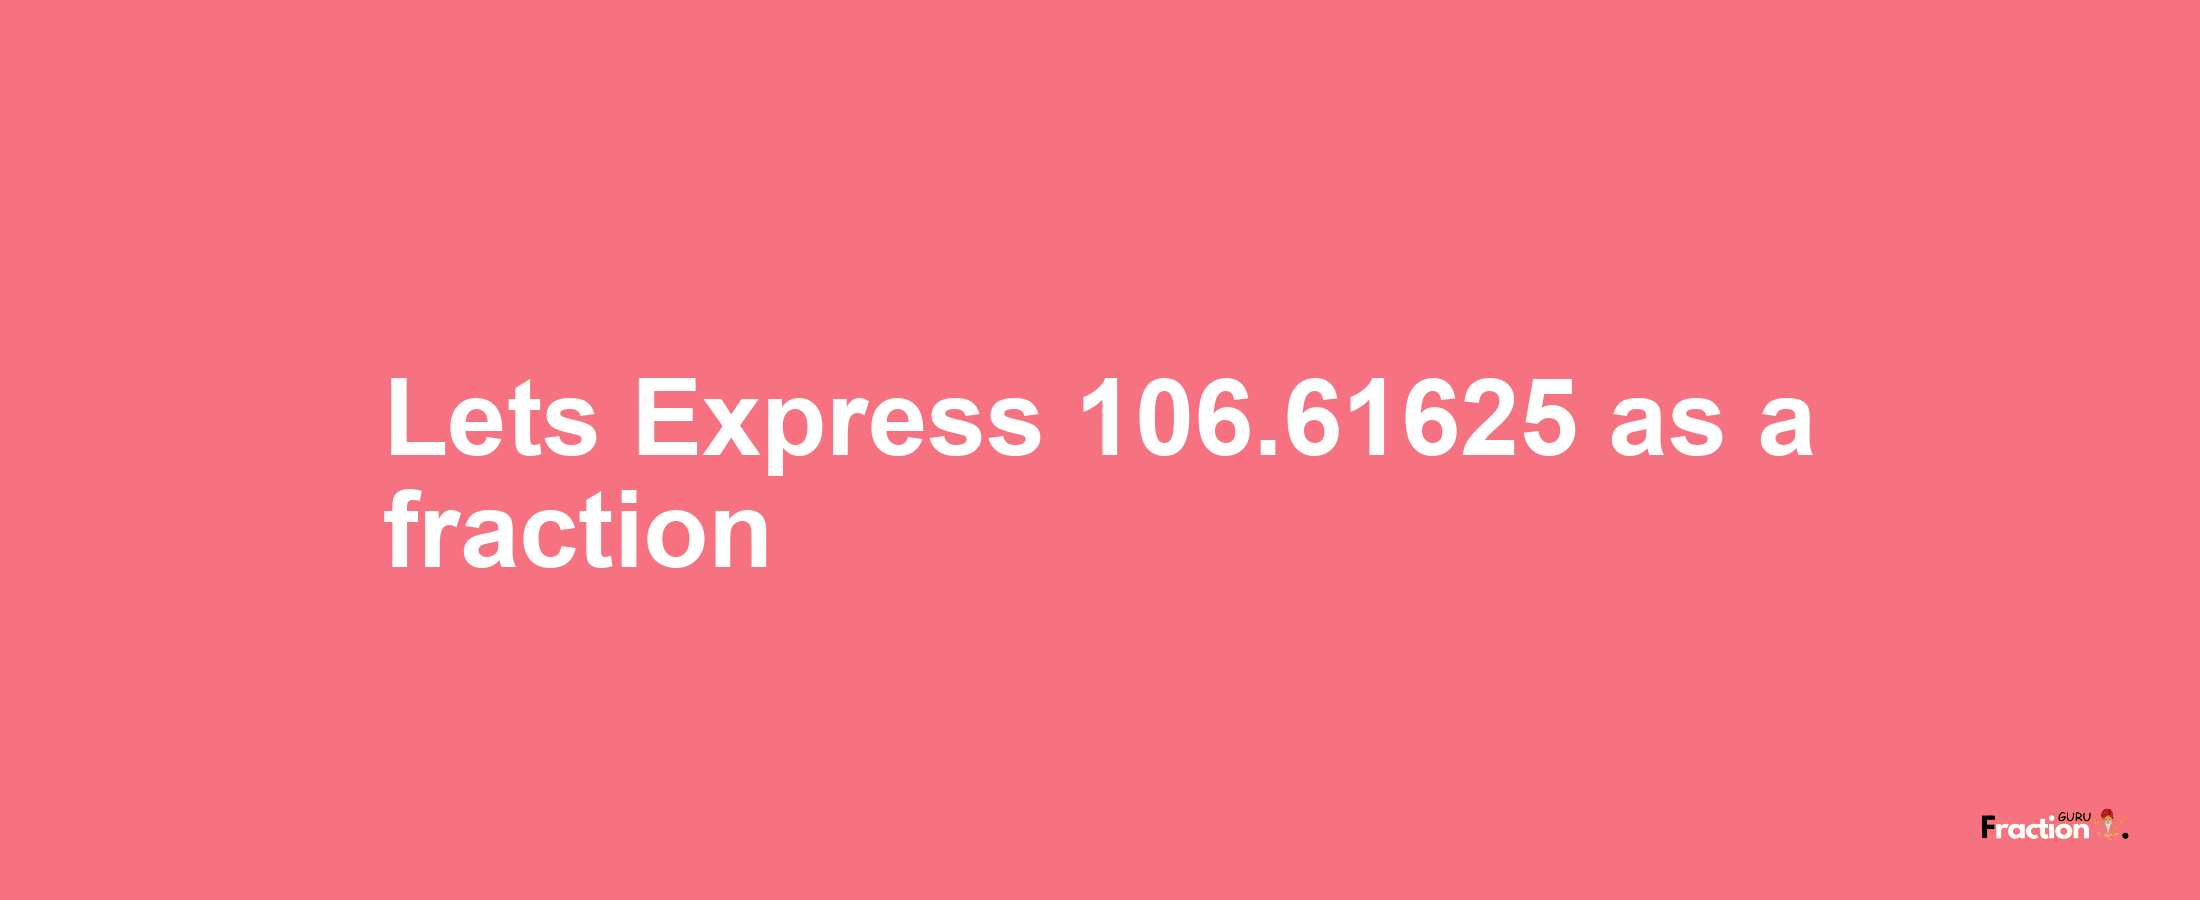 Lets Express 106.61625 as afraction